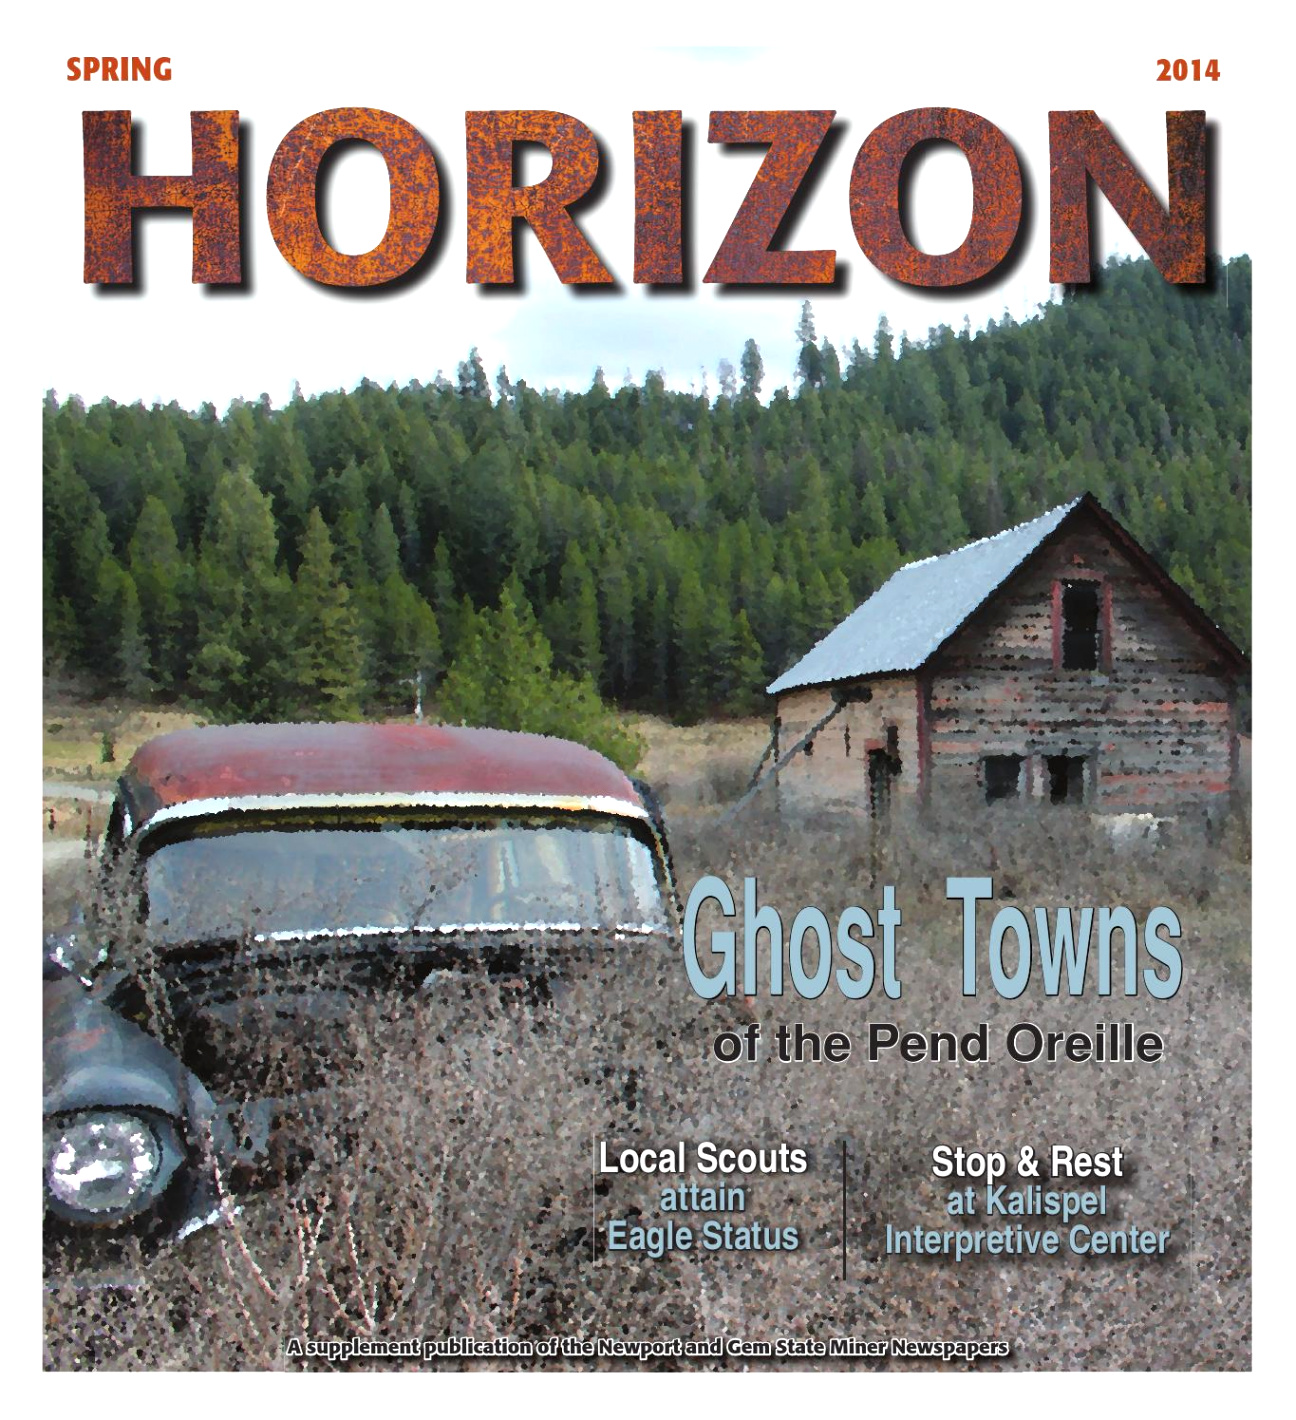 Car Accident Lawyer In Pend oreille Wa Dans Ghost towns Spot the Landscape by the Newport Miner - issuu